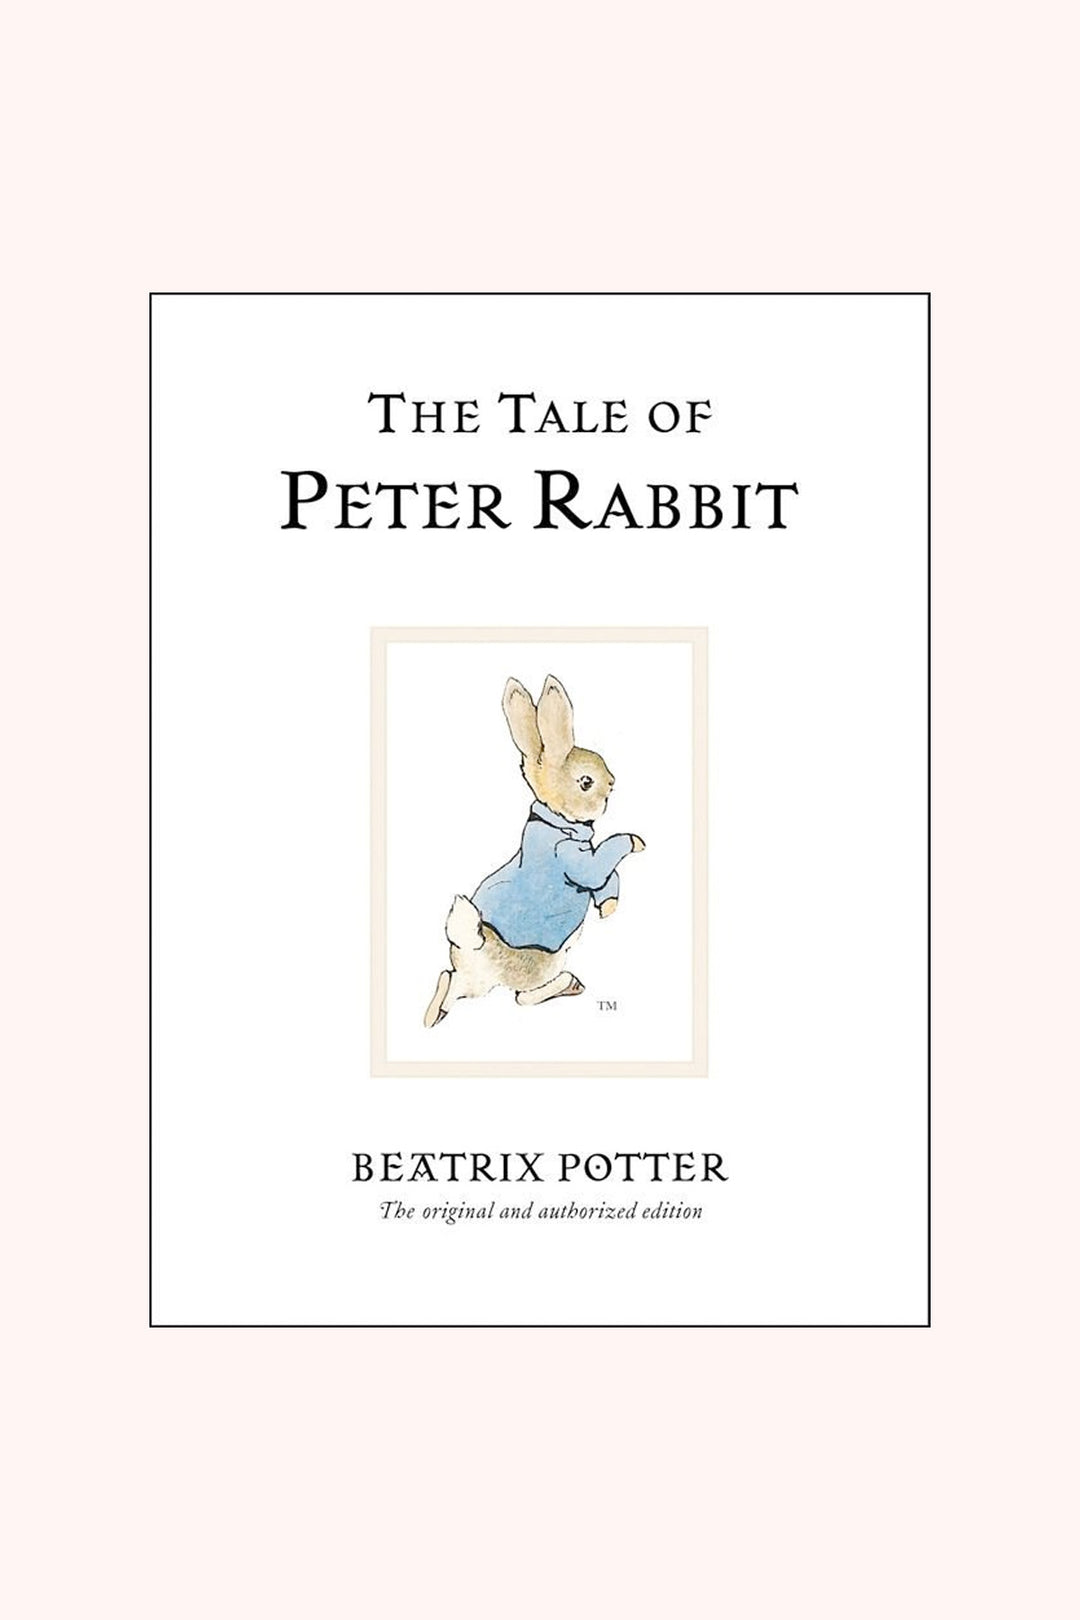 Book "The Tale of Peter Rabbit (Centenary ED White)"